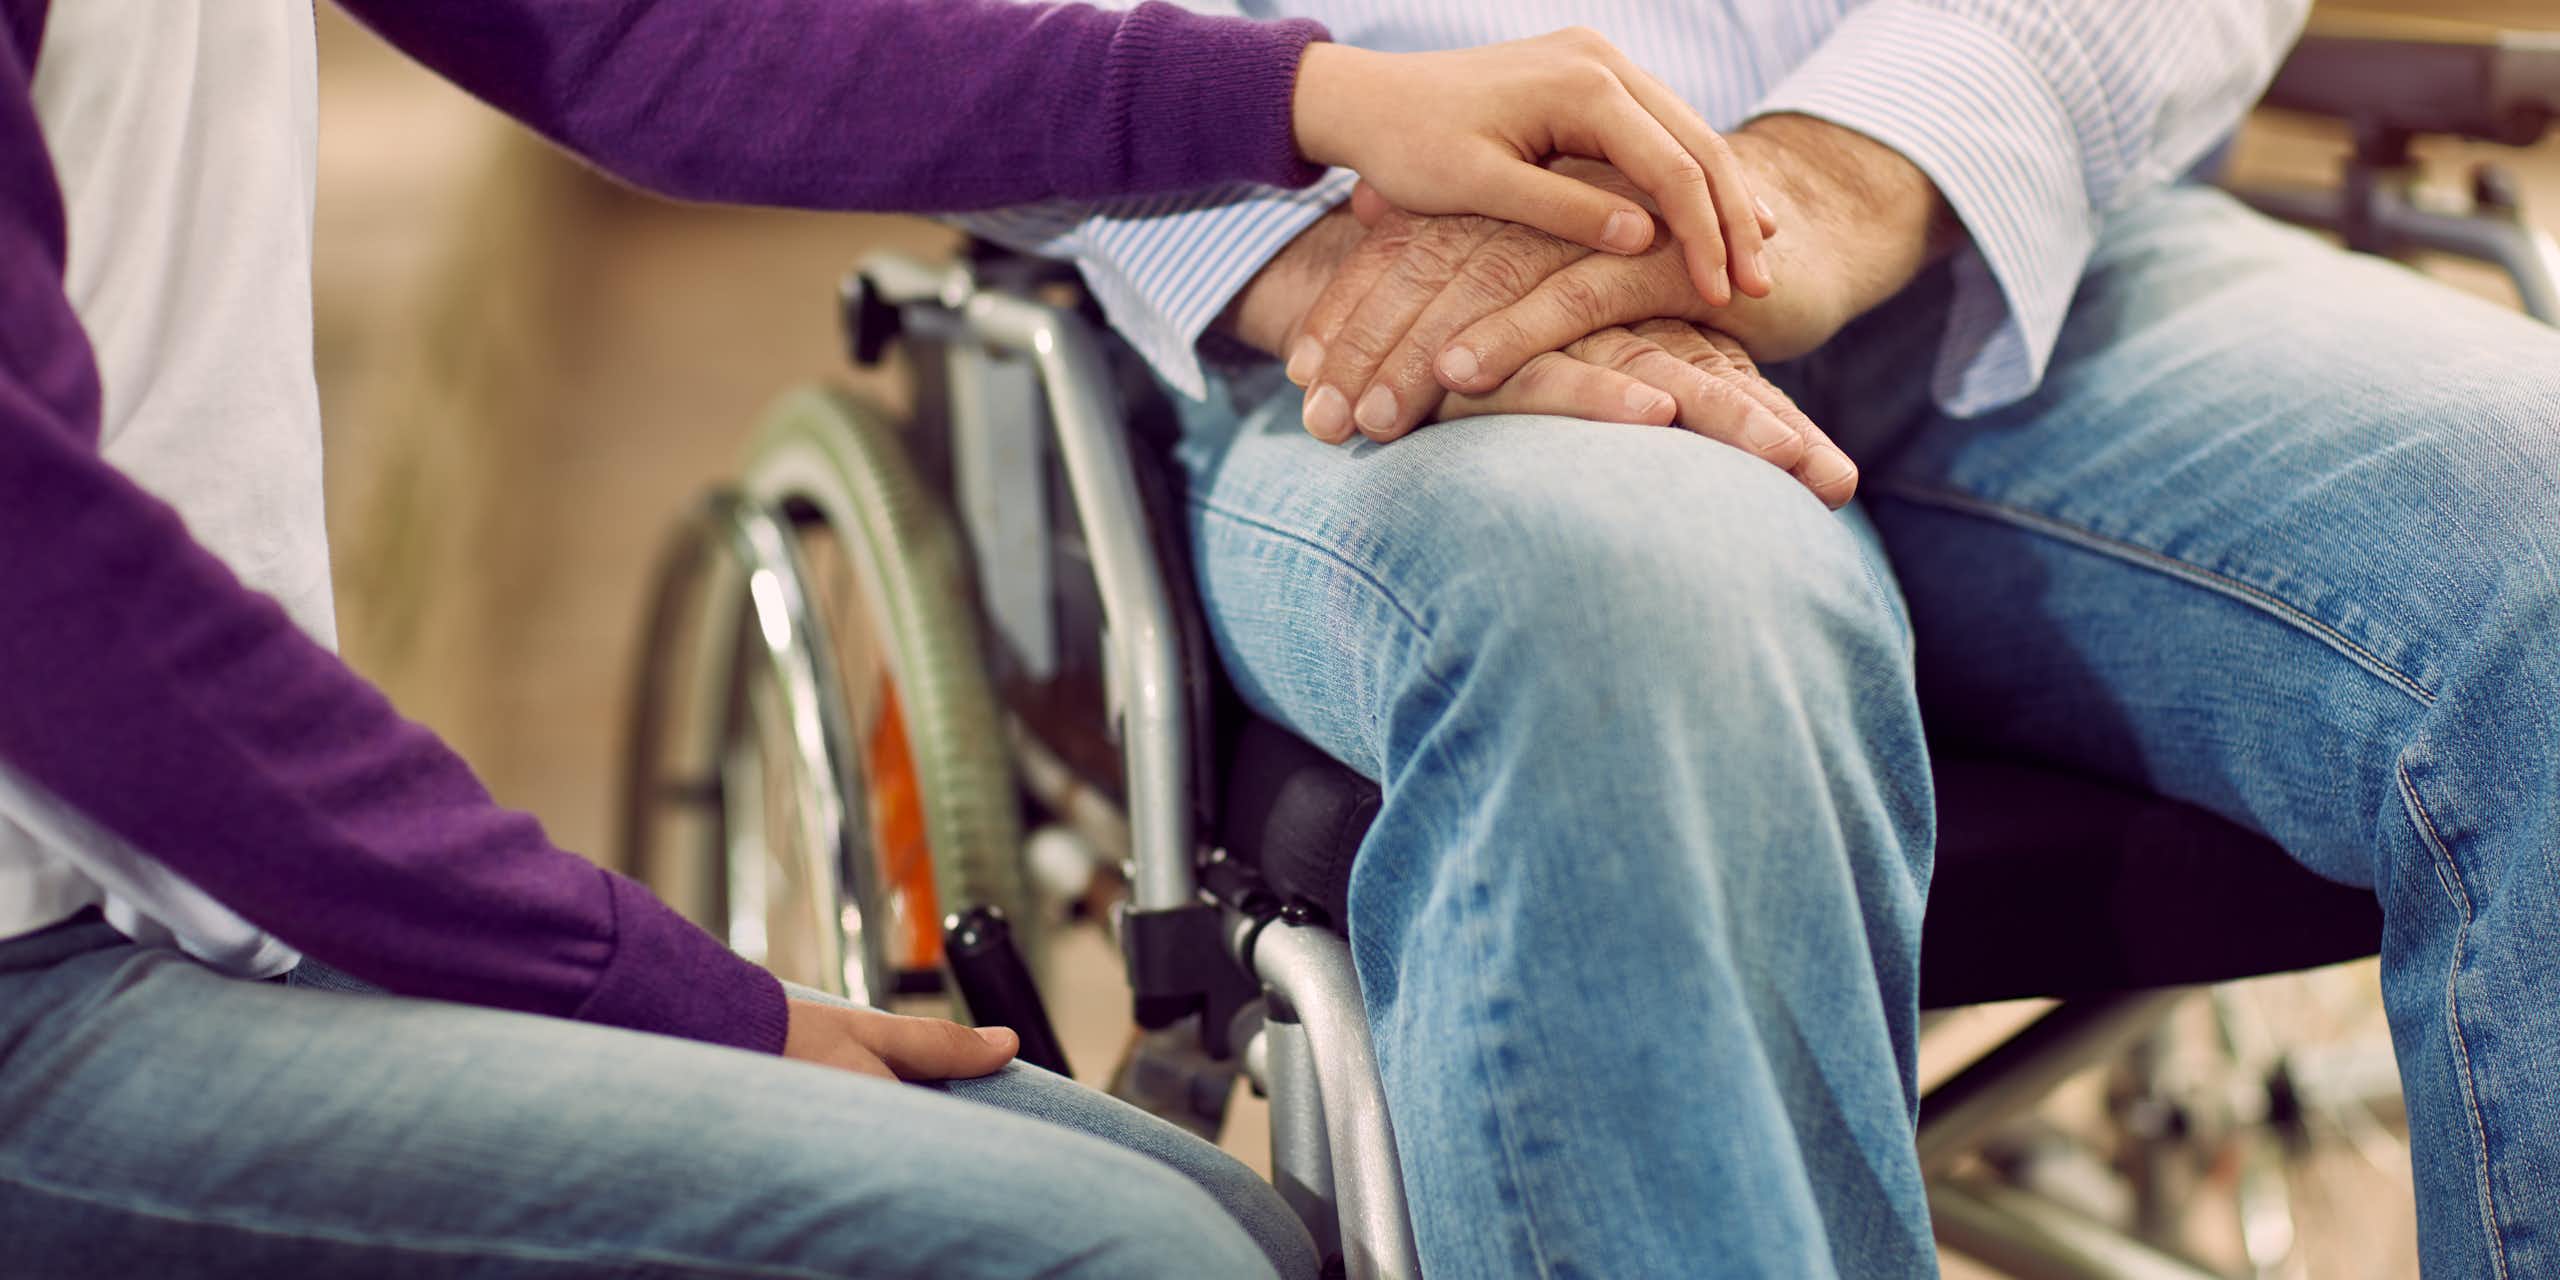 Close up of a man and woman sitting side by side, he is in a wheelchair and she is resting her hand on his, their faces are not visible in the photo